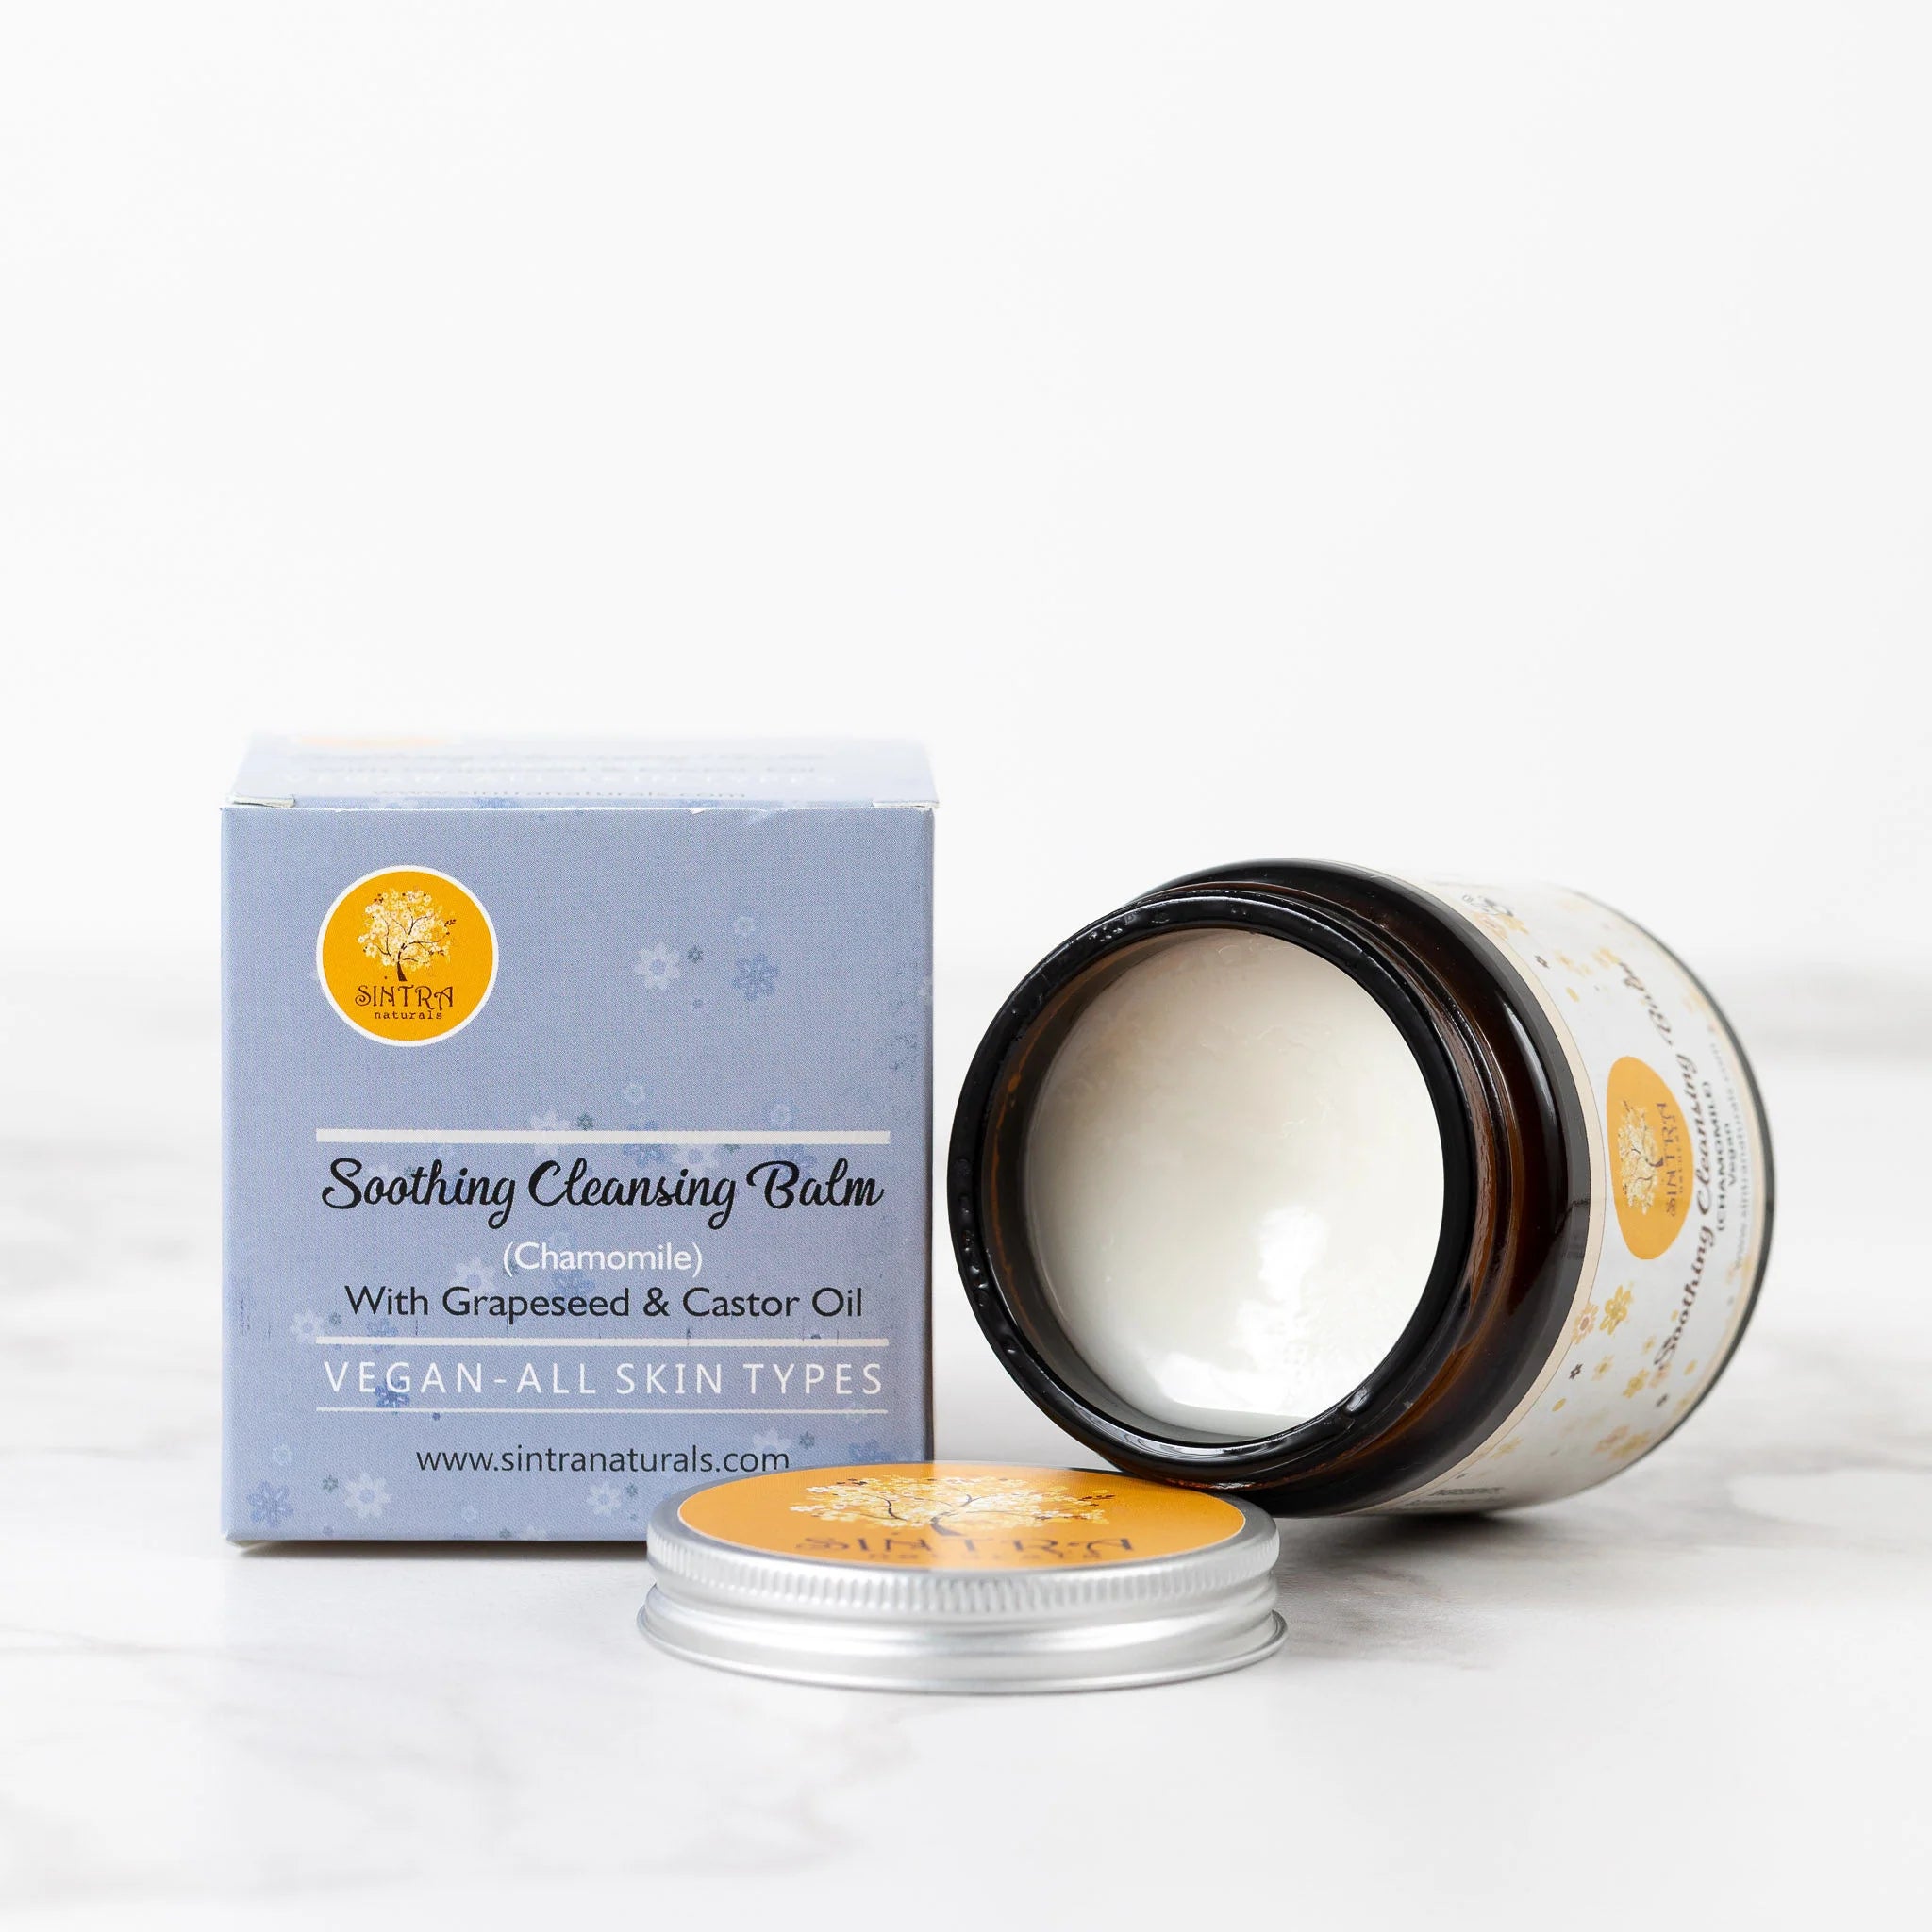 Soothing cleansing balm- Natural & Plastic free